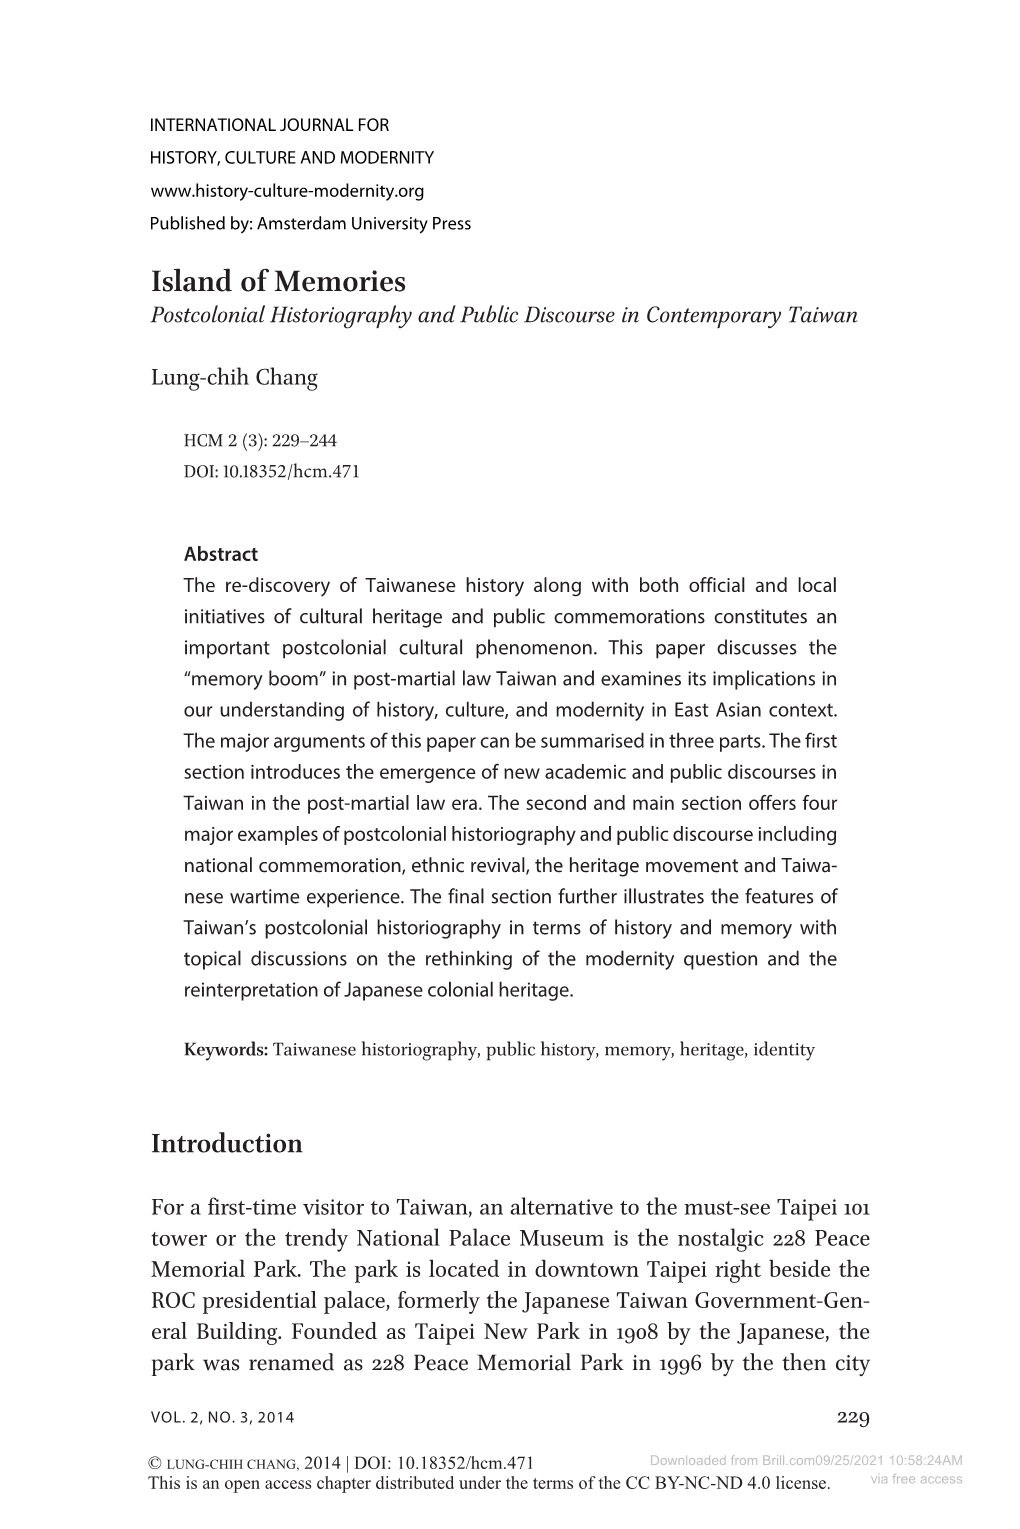 Island of Memories Postcolonial Historiography and Public Discourse in Contemporary Taiwan